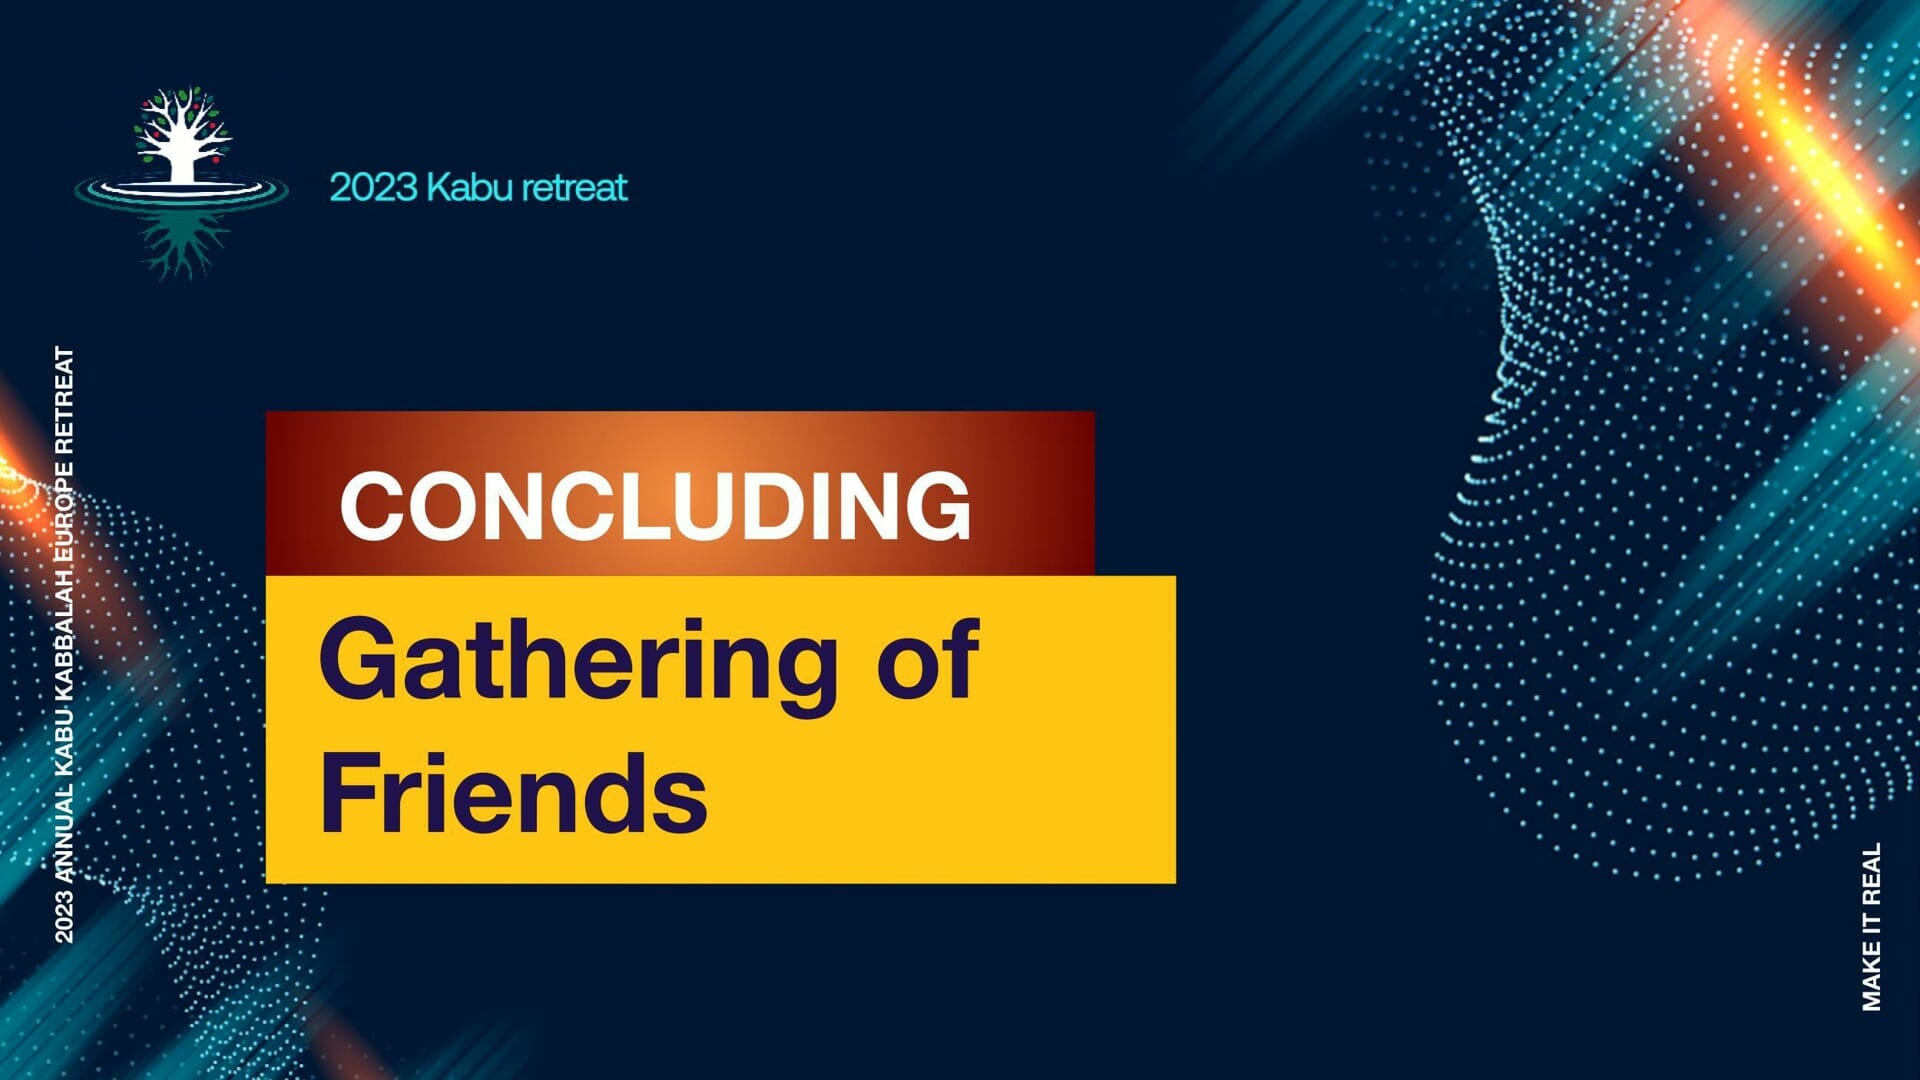 May 07, 2023 – Concluding Gathering of Friends